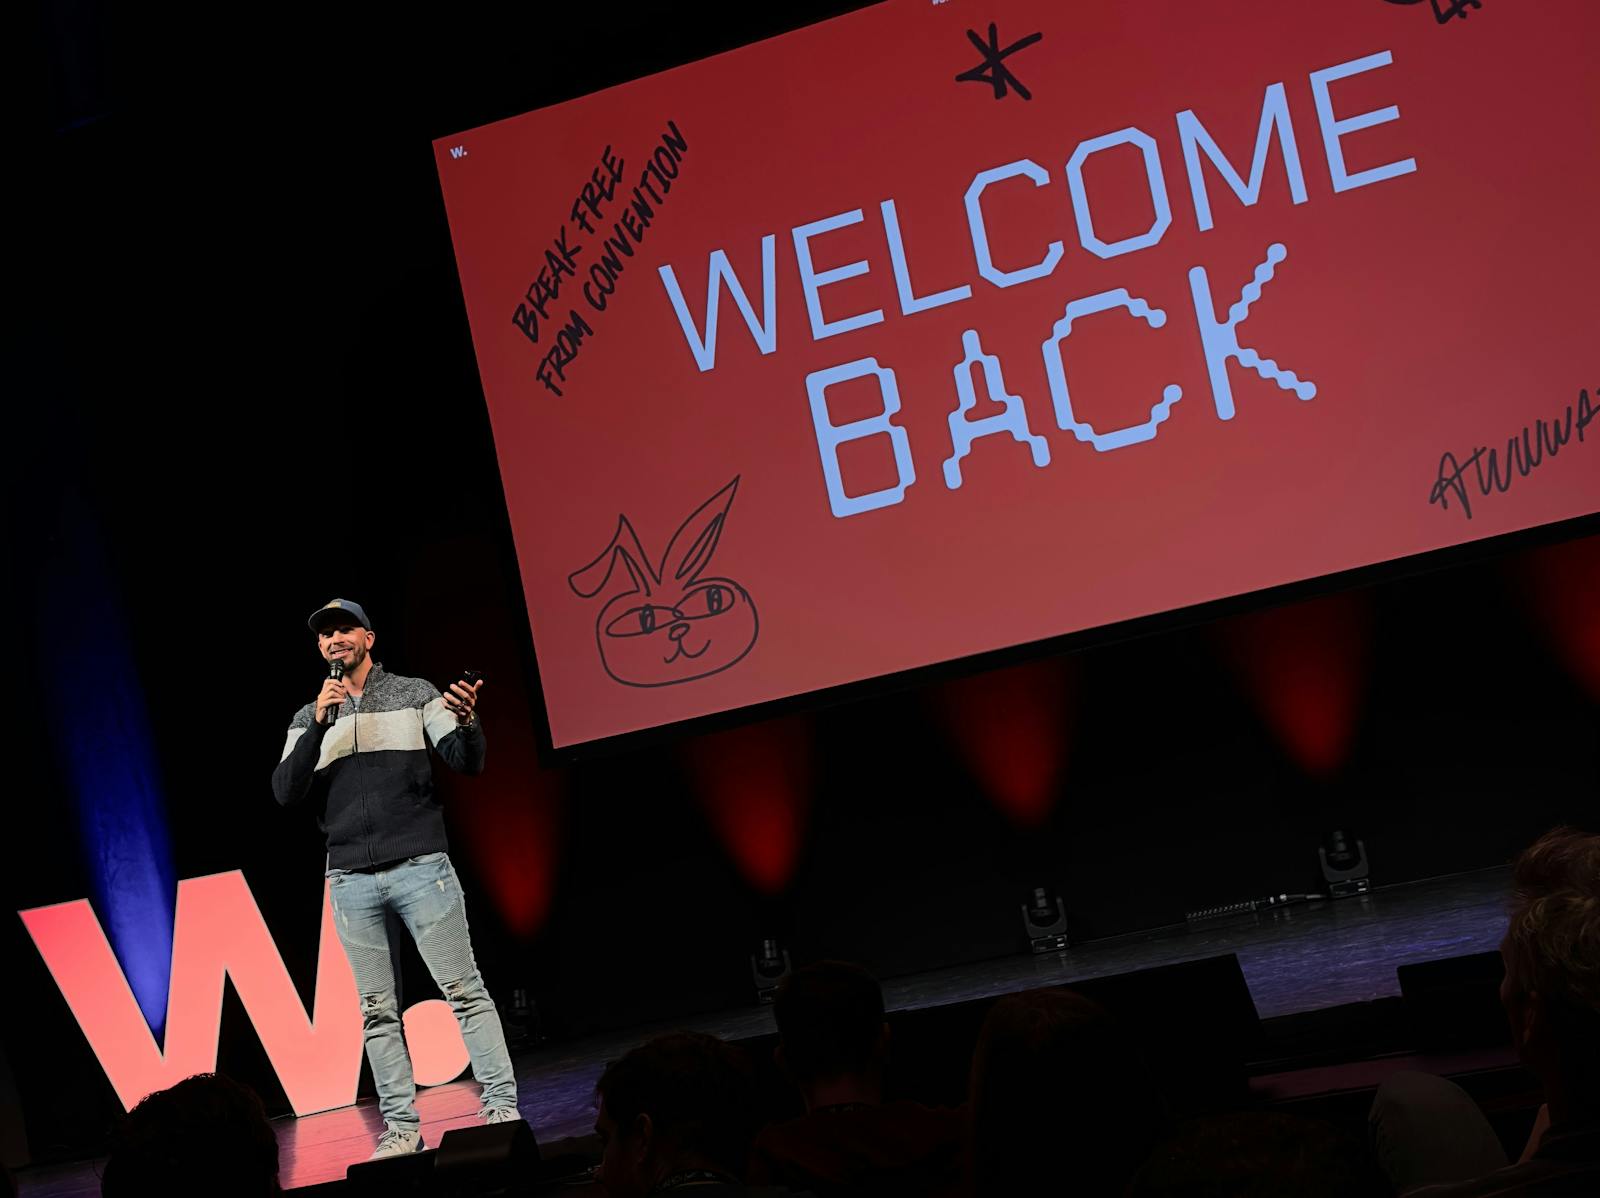 The image shows a speaker on stage at the Awwwards event. Behind the speaker is a large screen displaying the text 'WELCOME BACK' prominently in white letters on a red background. The atmosphere is informal, and the speaker is dressed in casual attire. Th